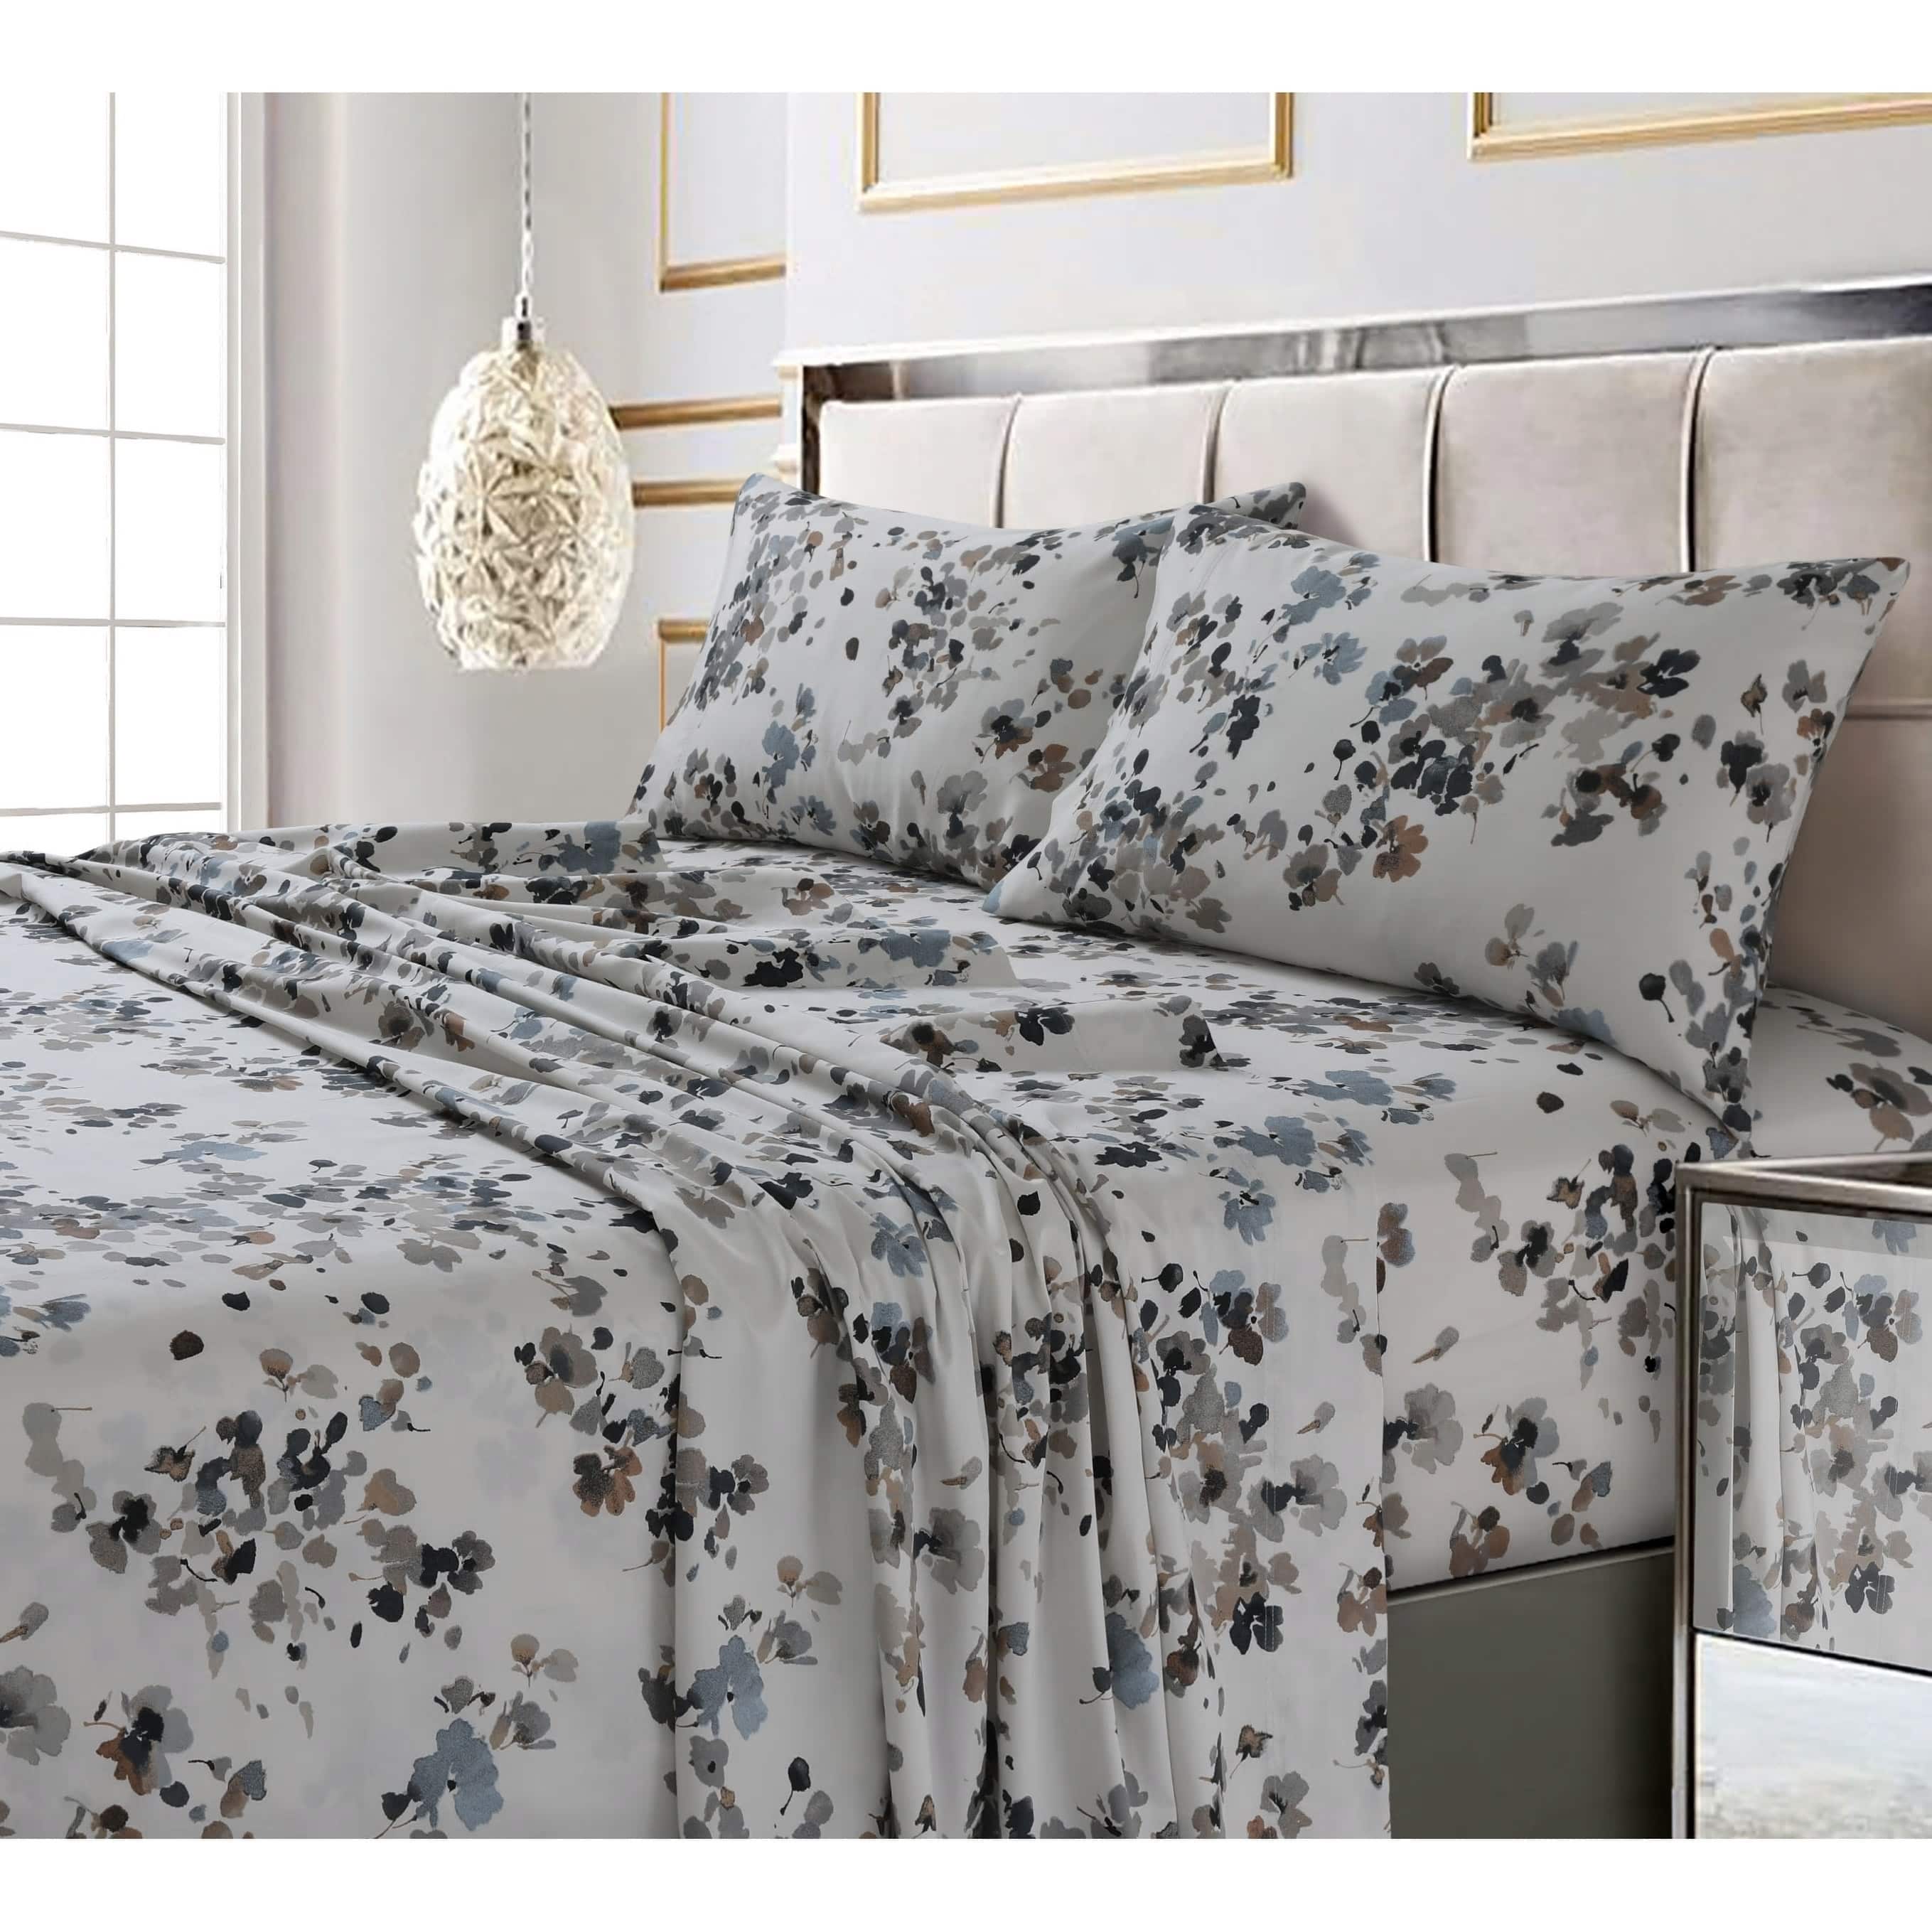 https://ak1.ostkcdn.com/images/products/is/images/direct/5eae7f63c9c9dd99ac0f0d15aca7a4d4dd0f7eec/300-Thread-Count-Cotton-Ultra-soft-Printed-Deep-Pocket-Bed-Sheet-Set.jpg